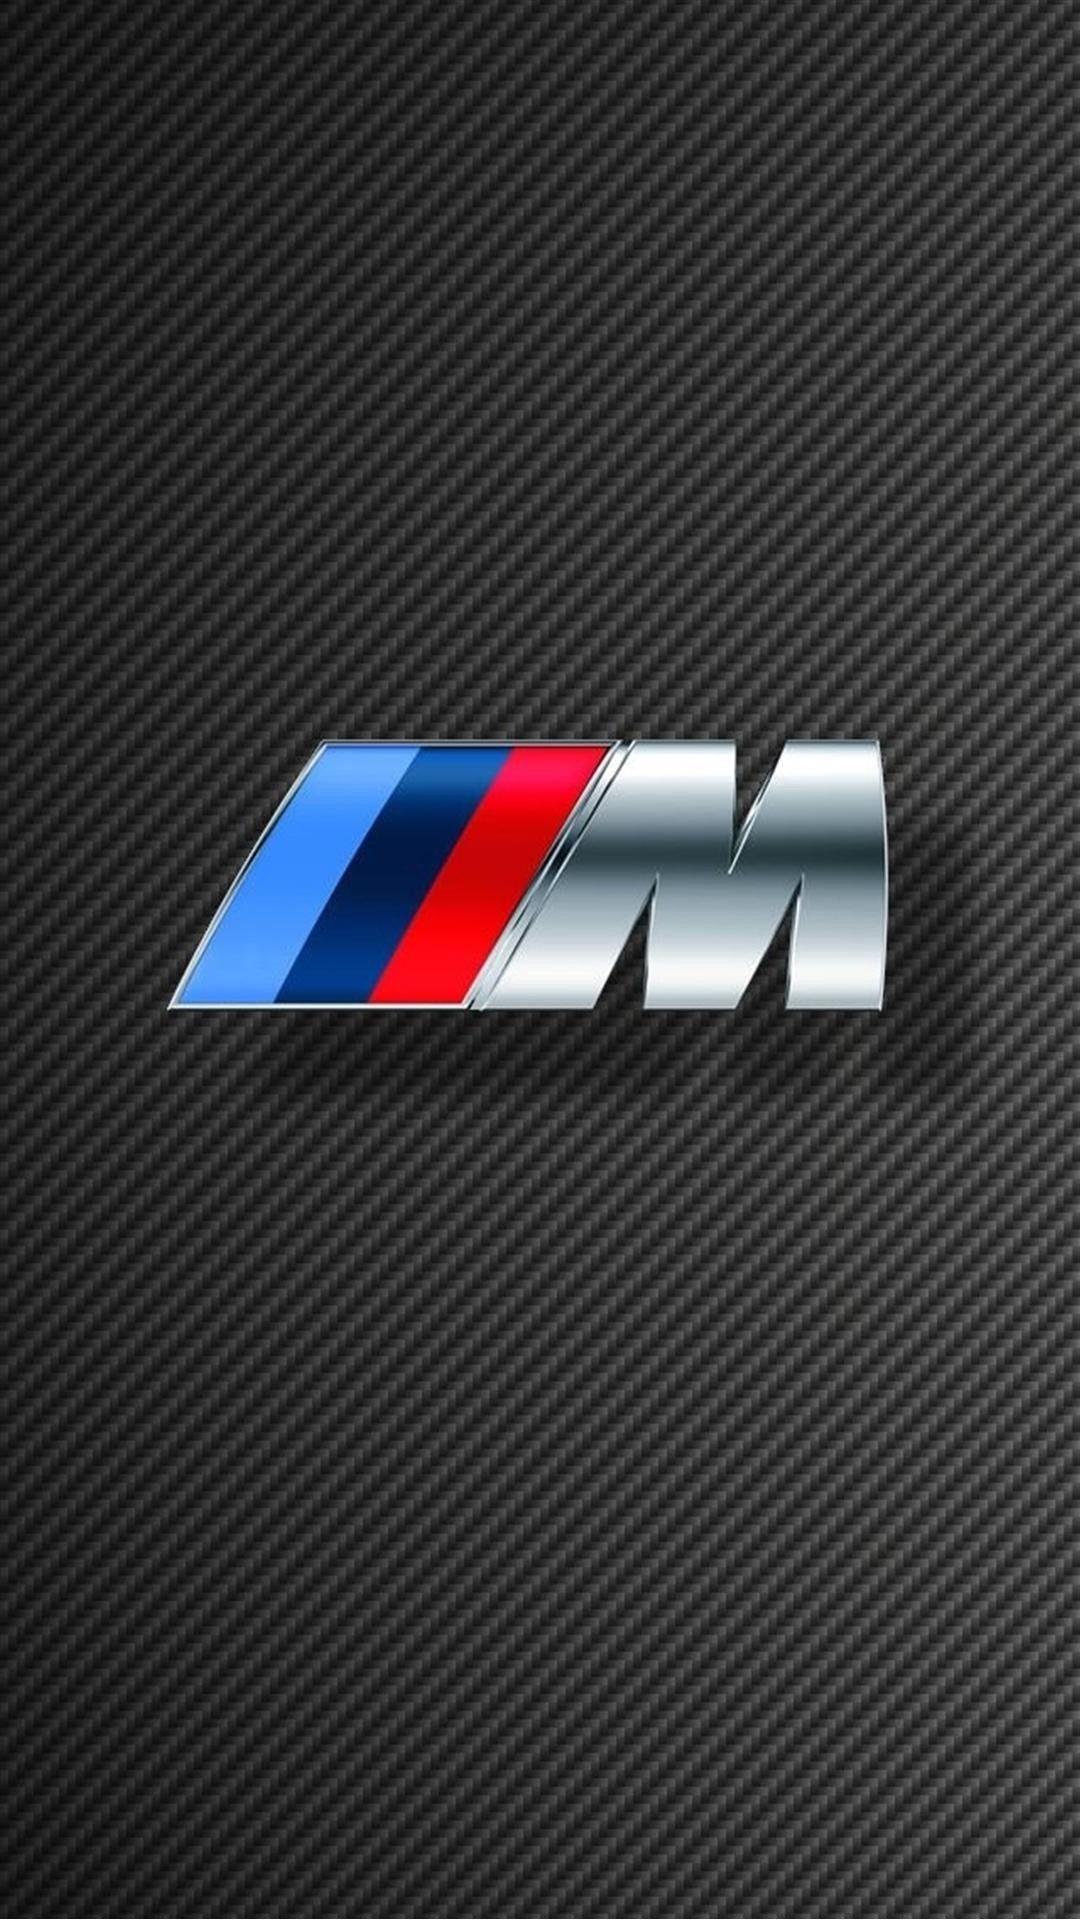 BMW M iPhone Wallpapers